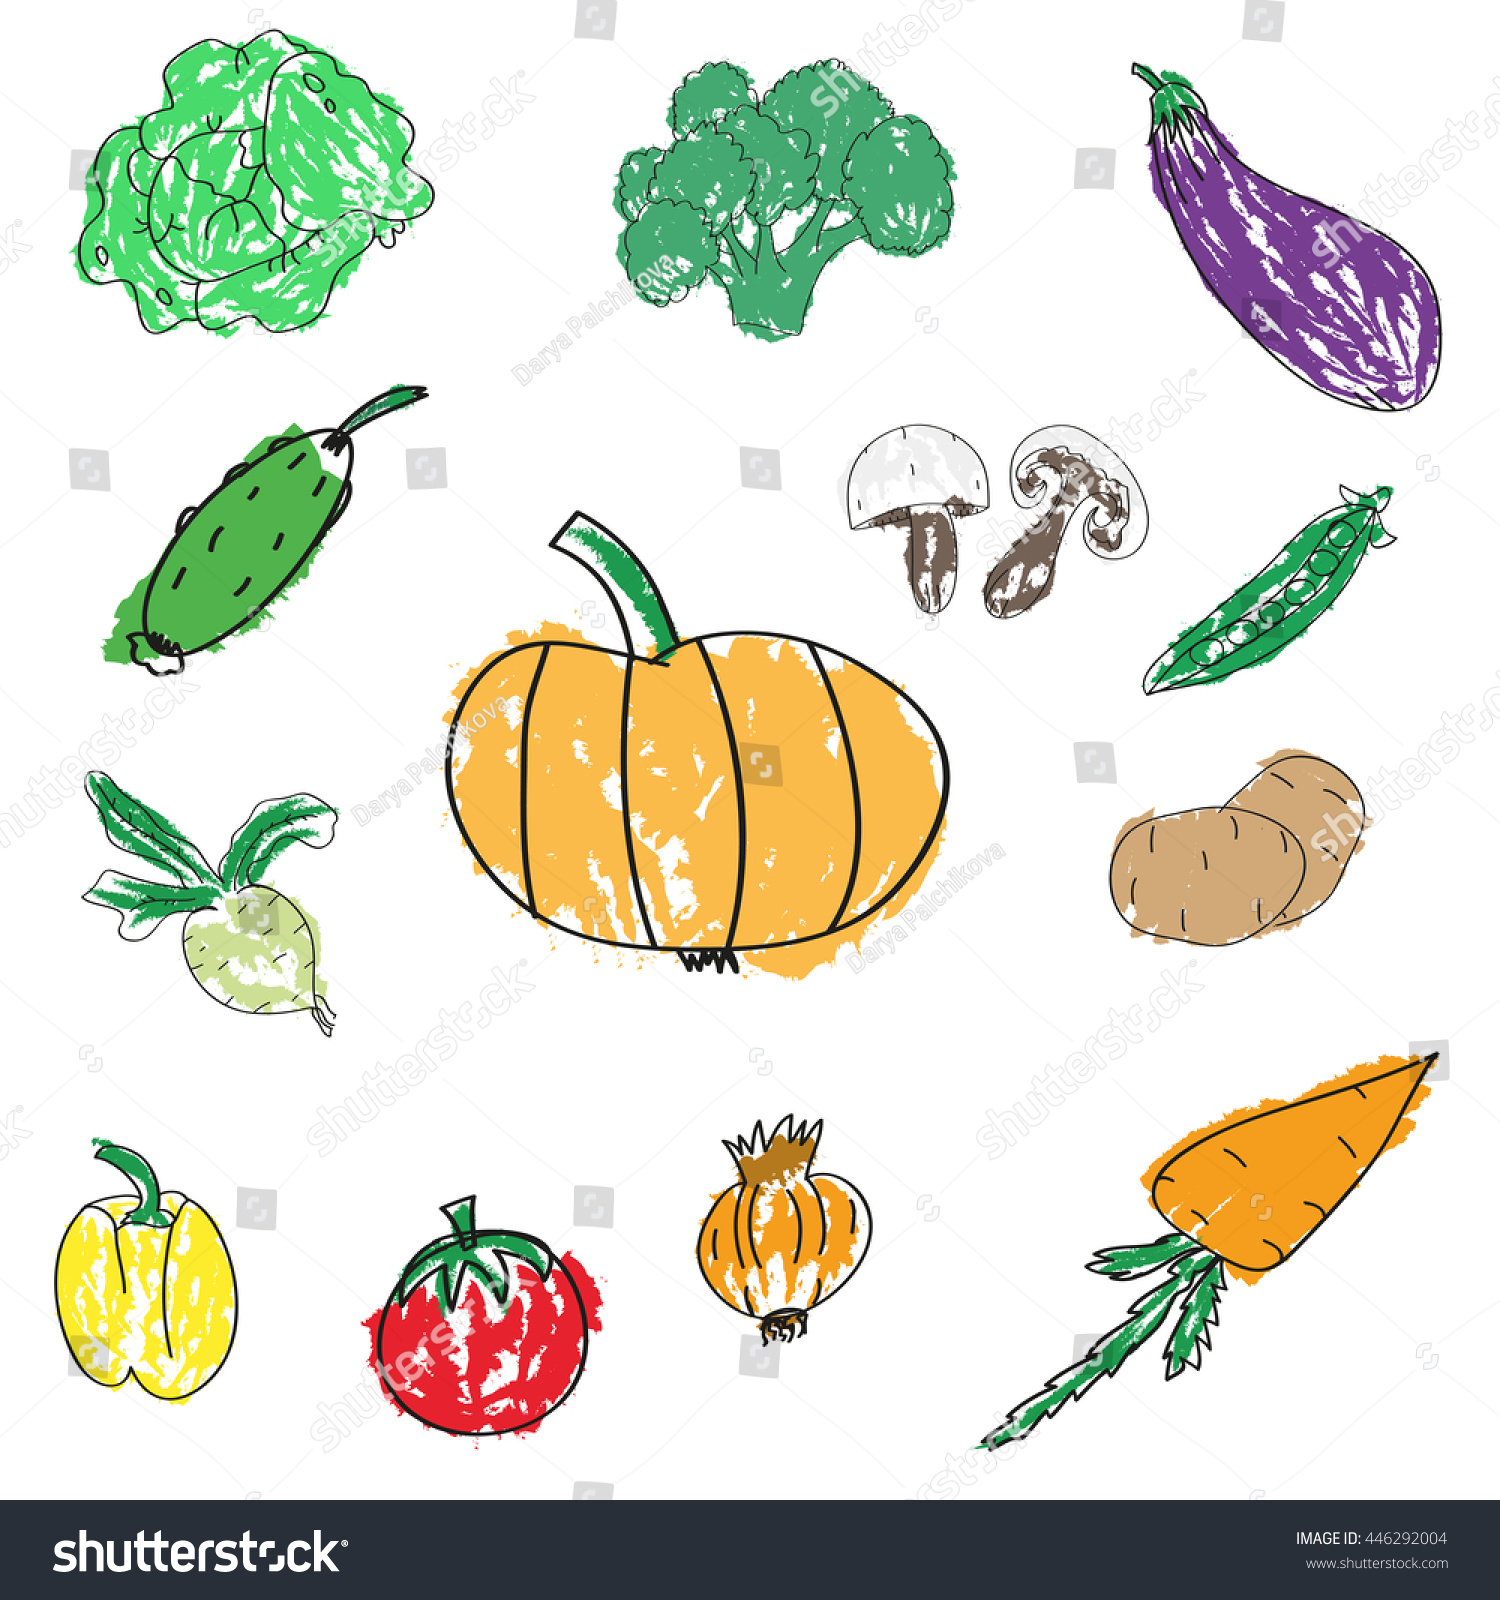 Set of various doodles, hand drawn rough simple sketches of different kinds of vegetables. #446292004